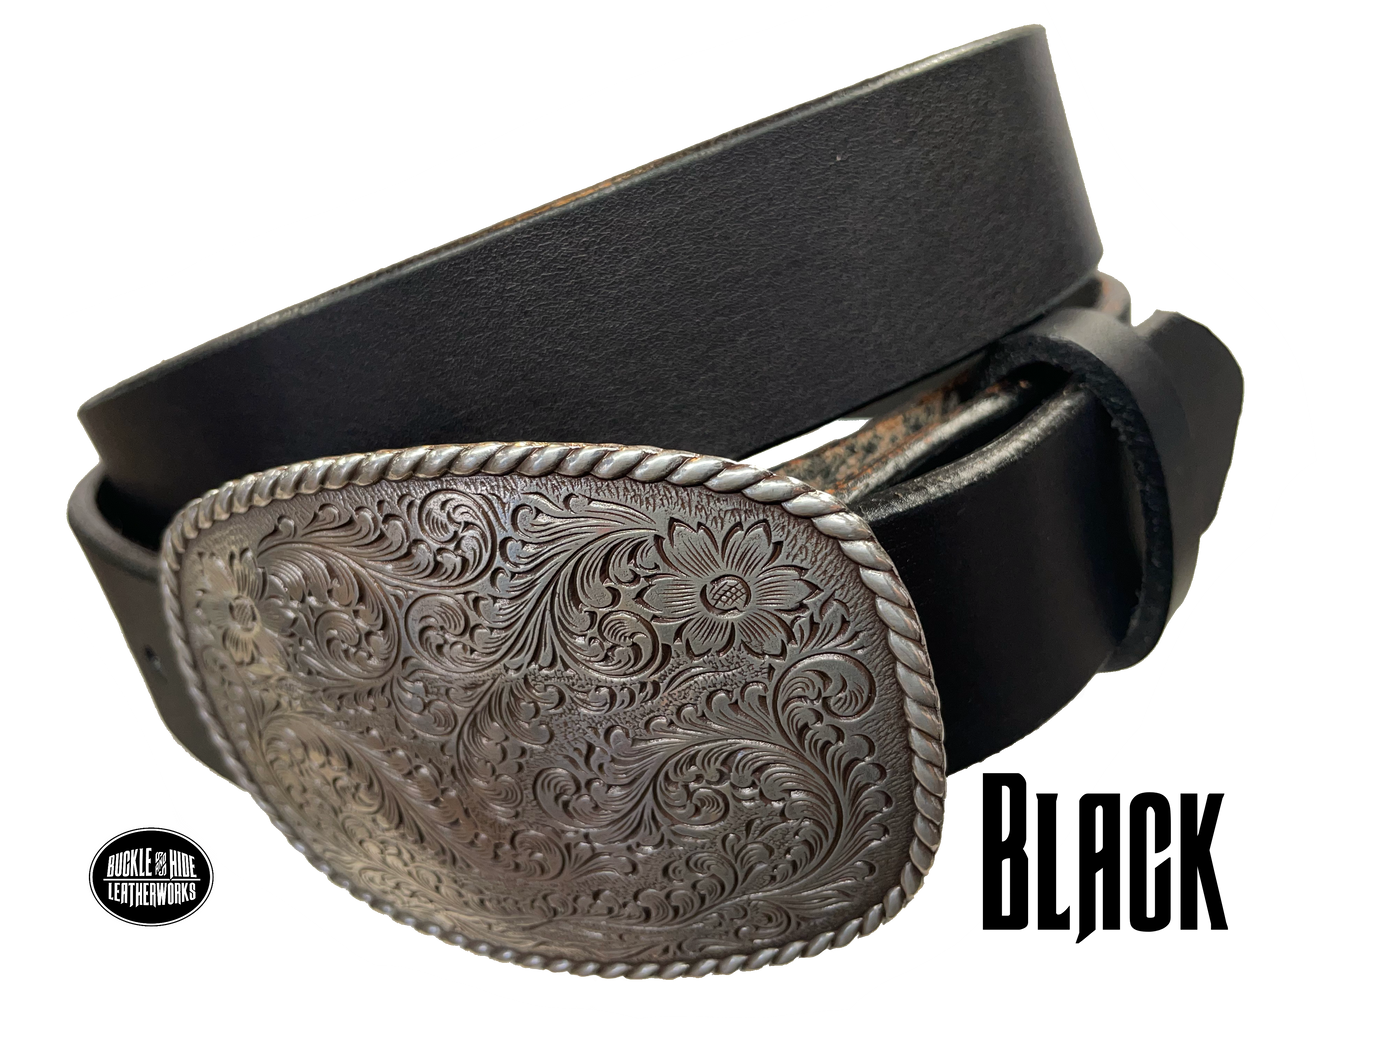 This rectangular shaped buckle by Nocona has rounded edges with rope design around the border. It is chrome colored with scroll design etched appearance on surface.  Measures 2 3/4" tall by 3 3/4" wide and fits belts up to 1 1/2" wide. Buckle is made in Taiwan. Belt is a single strip of leather that is 1 1/2" wide and available in sizes 34" to 44". Colors are distressed brown, black, and dark brown. Black pictured. Available online and in our retail shop in Smyrna, TN, just outside Nashville.